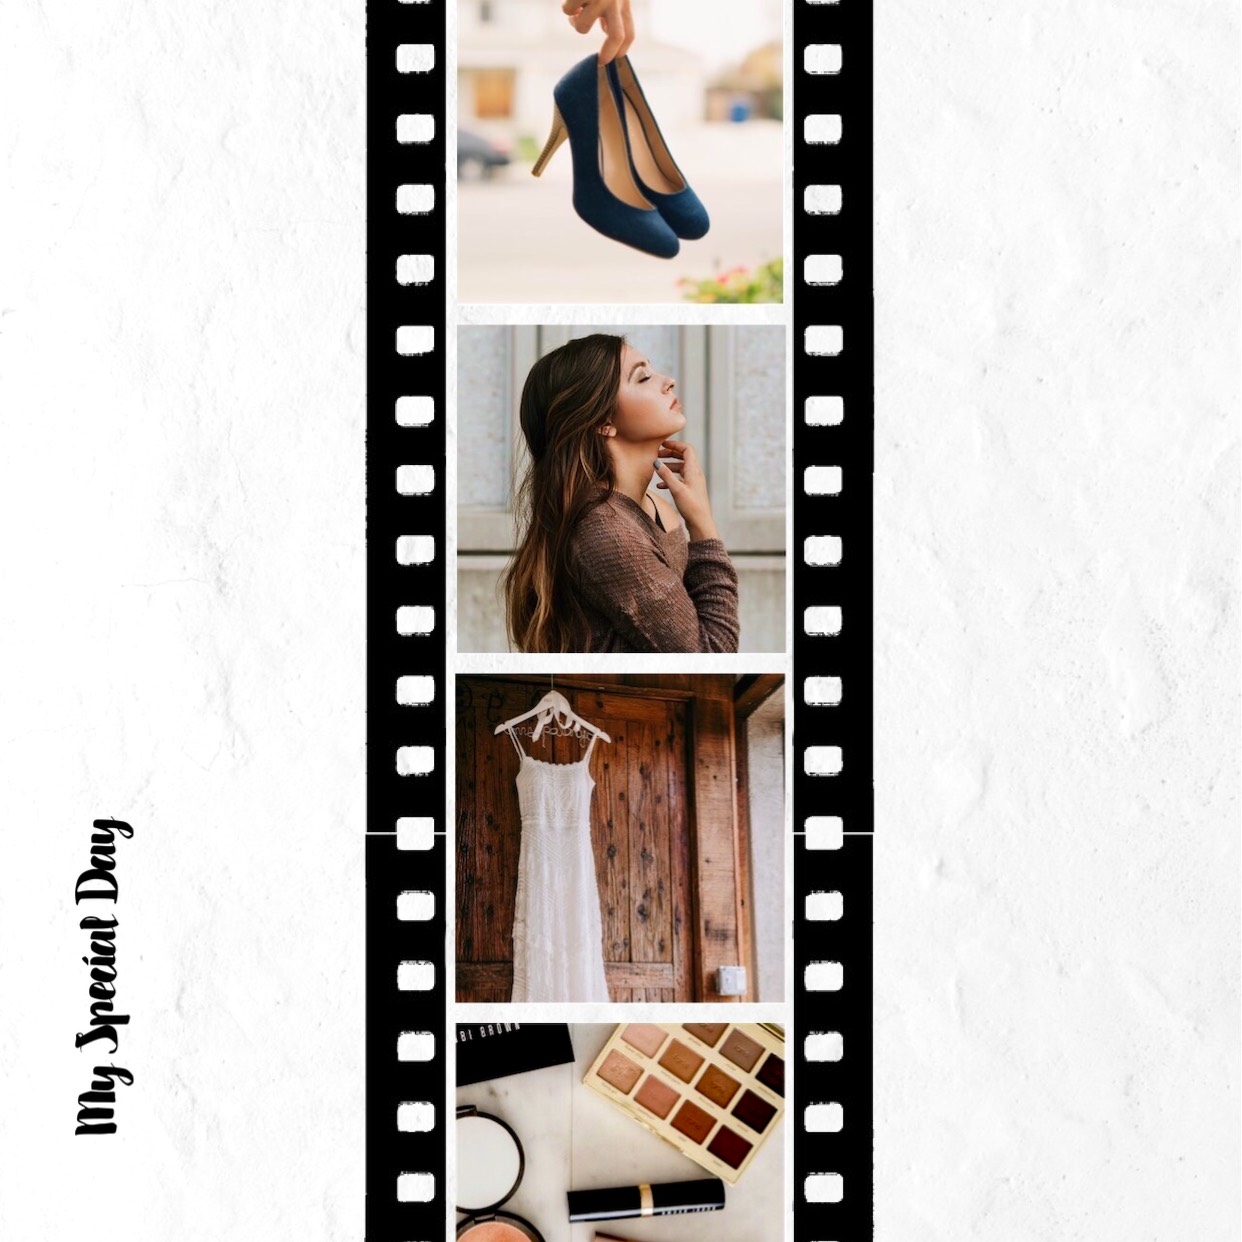 Woman getting ready for her wedding day film strip collage Facebook post template